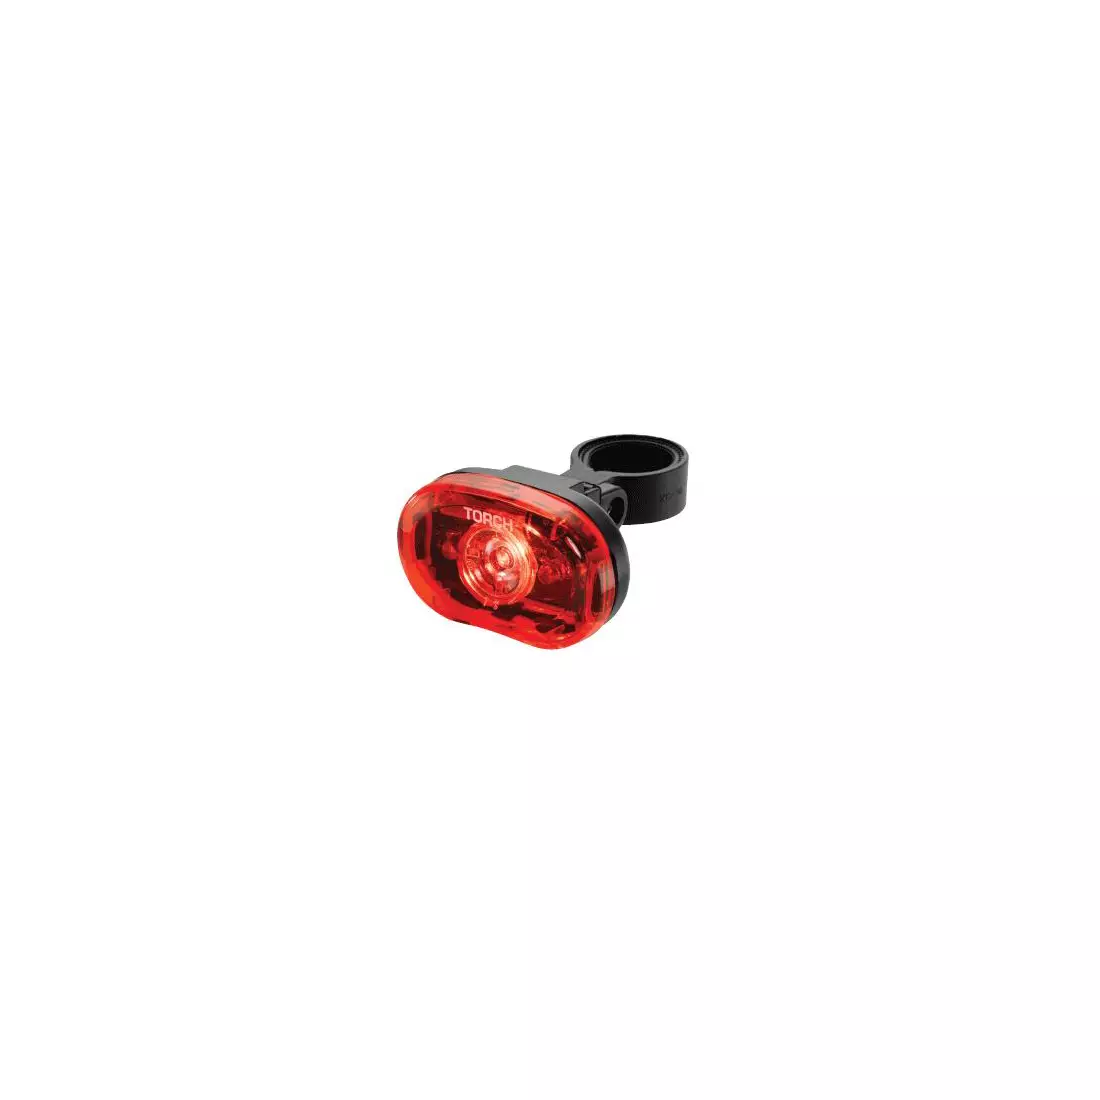 TORCH TAIL BRIGHT rear lamp 0.5W black TOR-54010